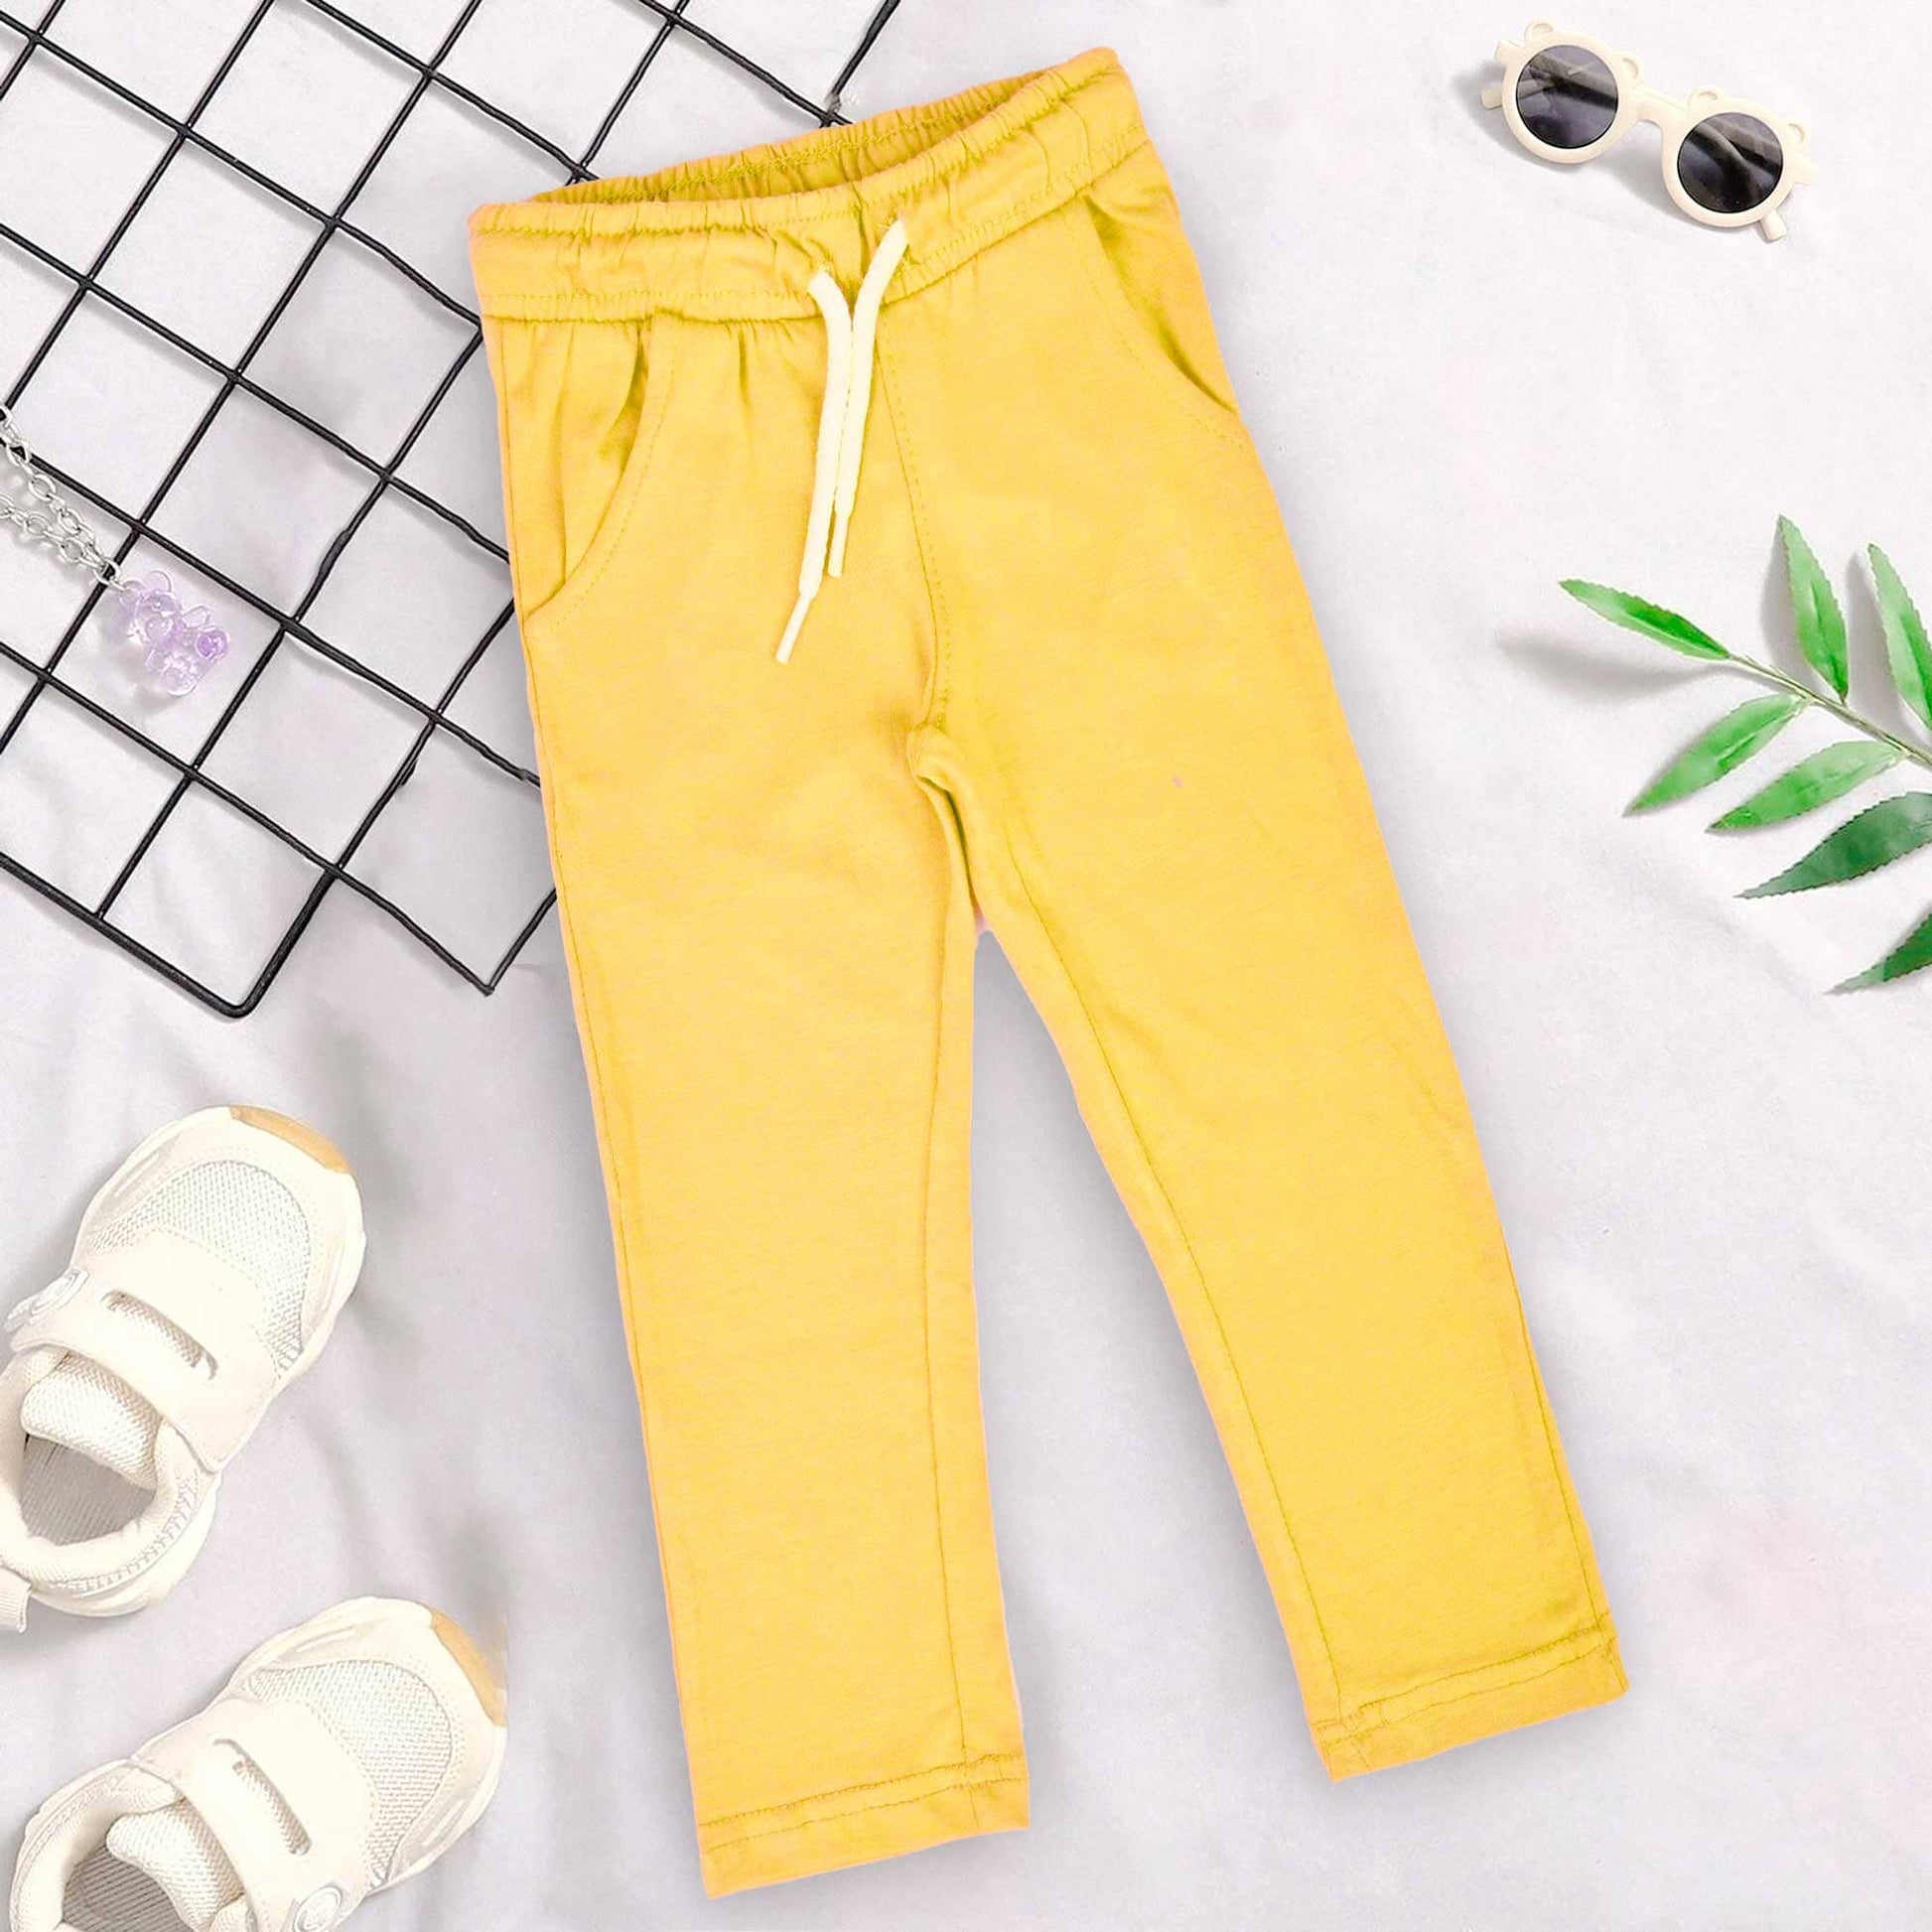 Minoti Kid's Solid Design Trousers Boy's Trousers SZK Yellow 1-2 Years 